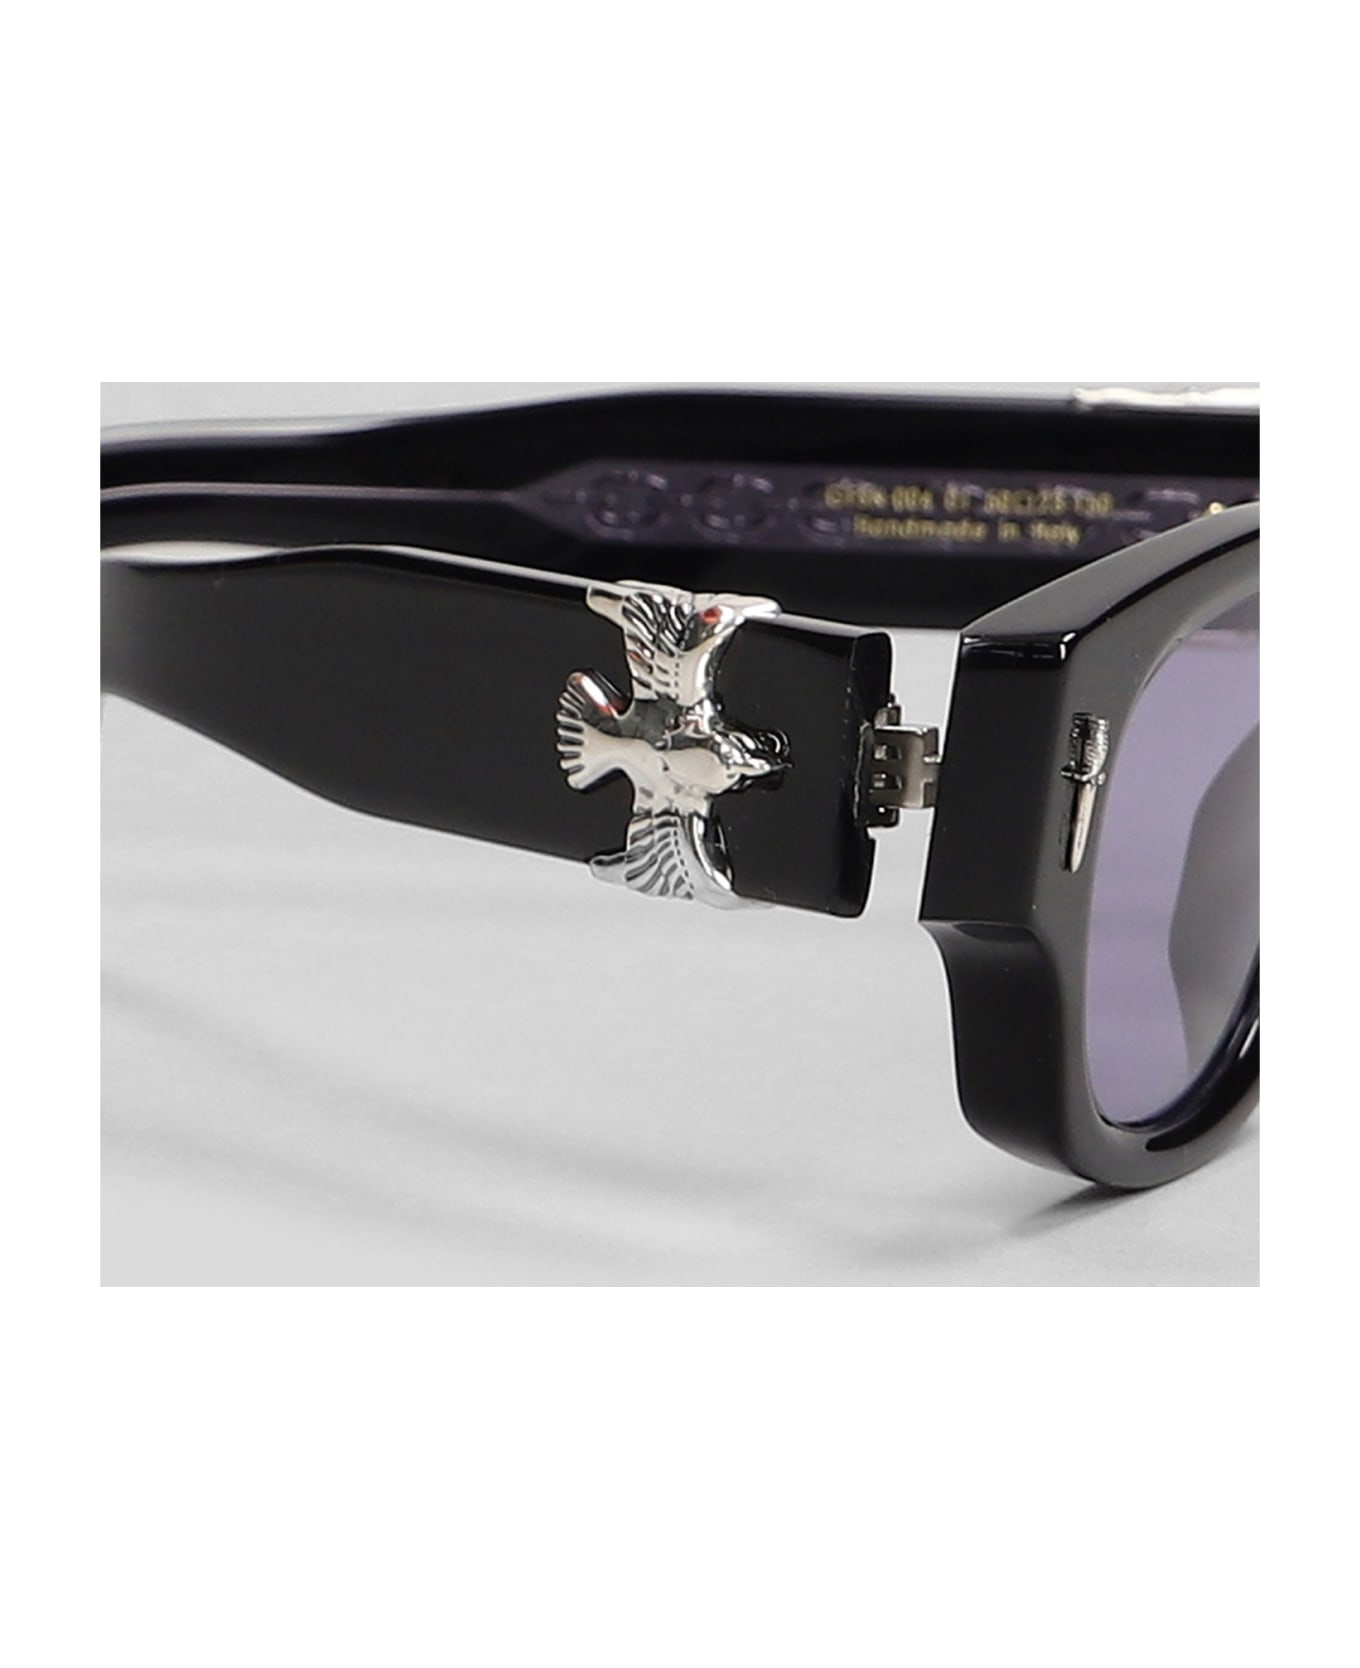 Cutler and Gross The Great Frog Sunglasses In Black Acetate - black